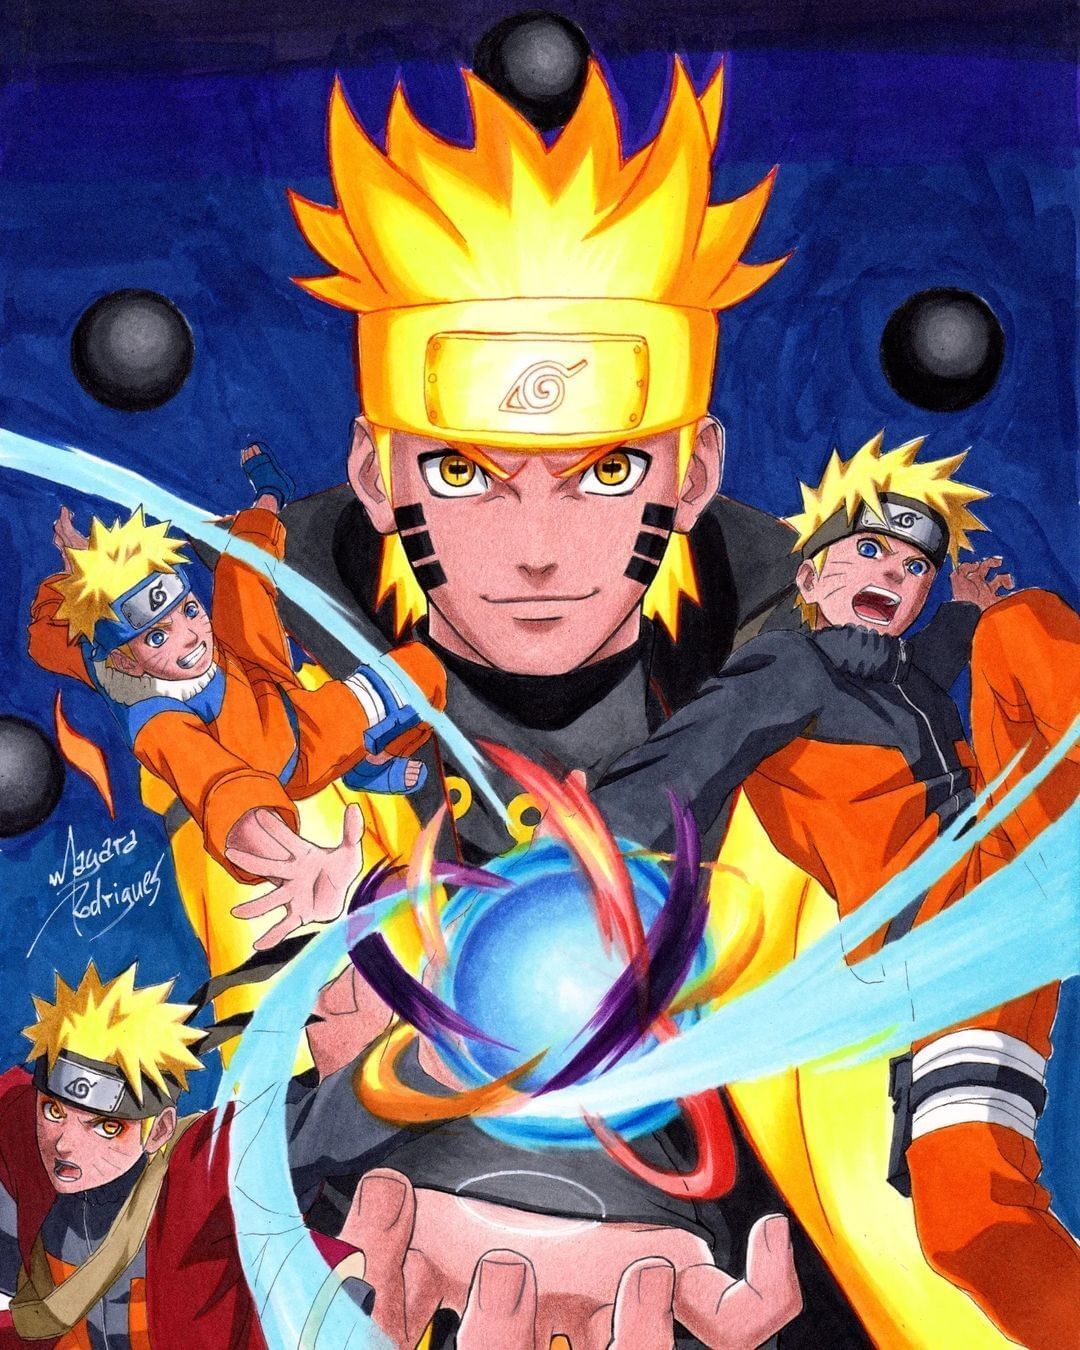 Naruto Will Always Be Better Than Boruto - Here's Why